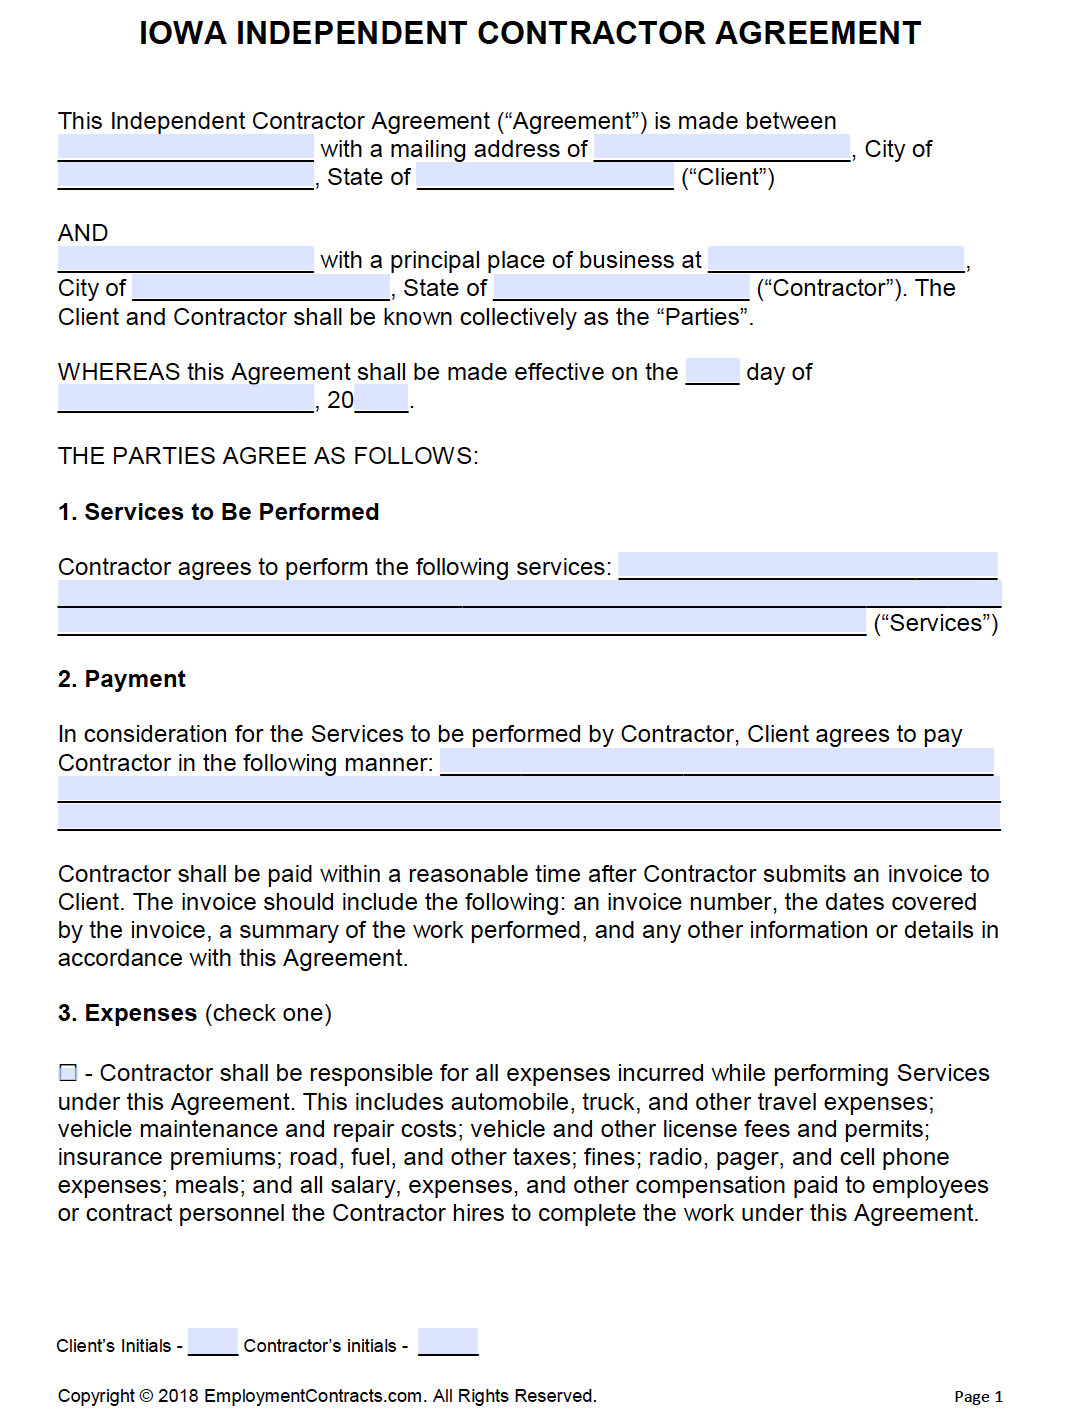 free-iowa-independent-contractor-agreement-pdf-word